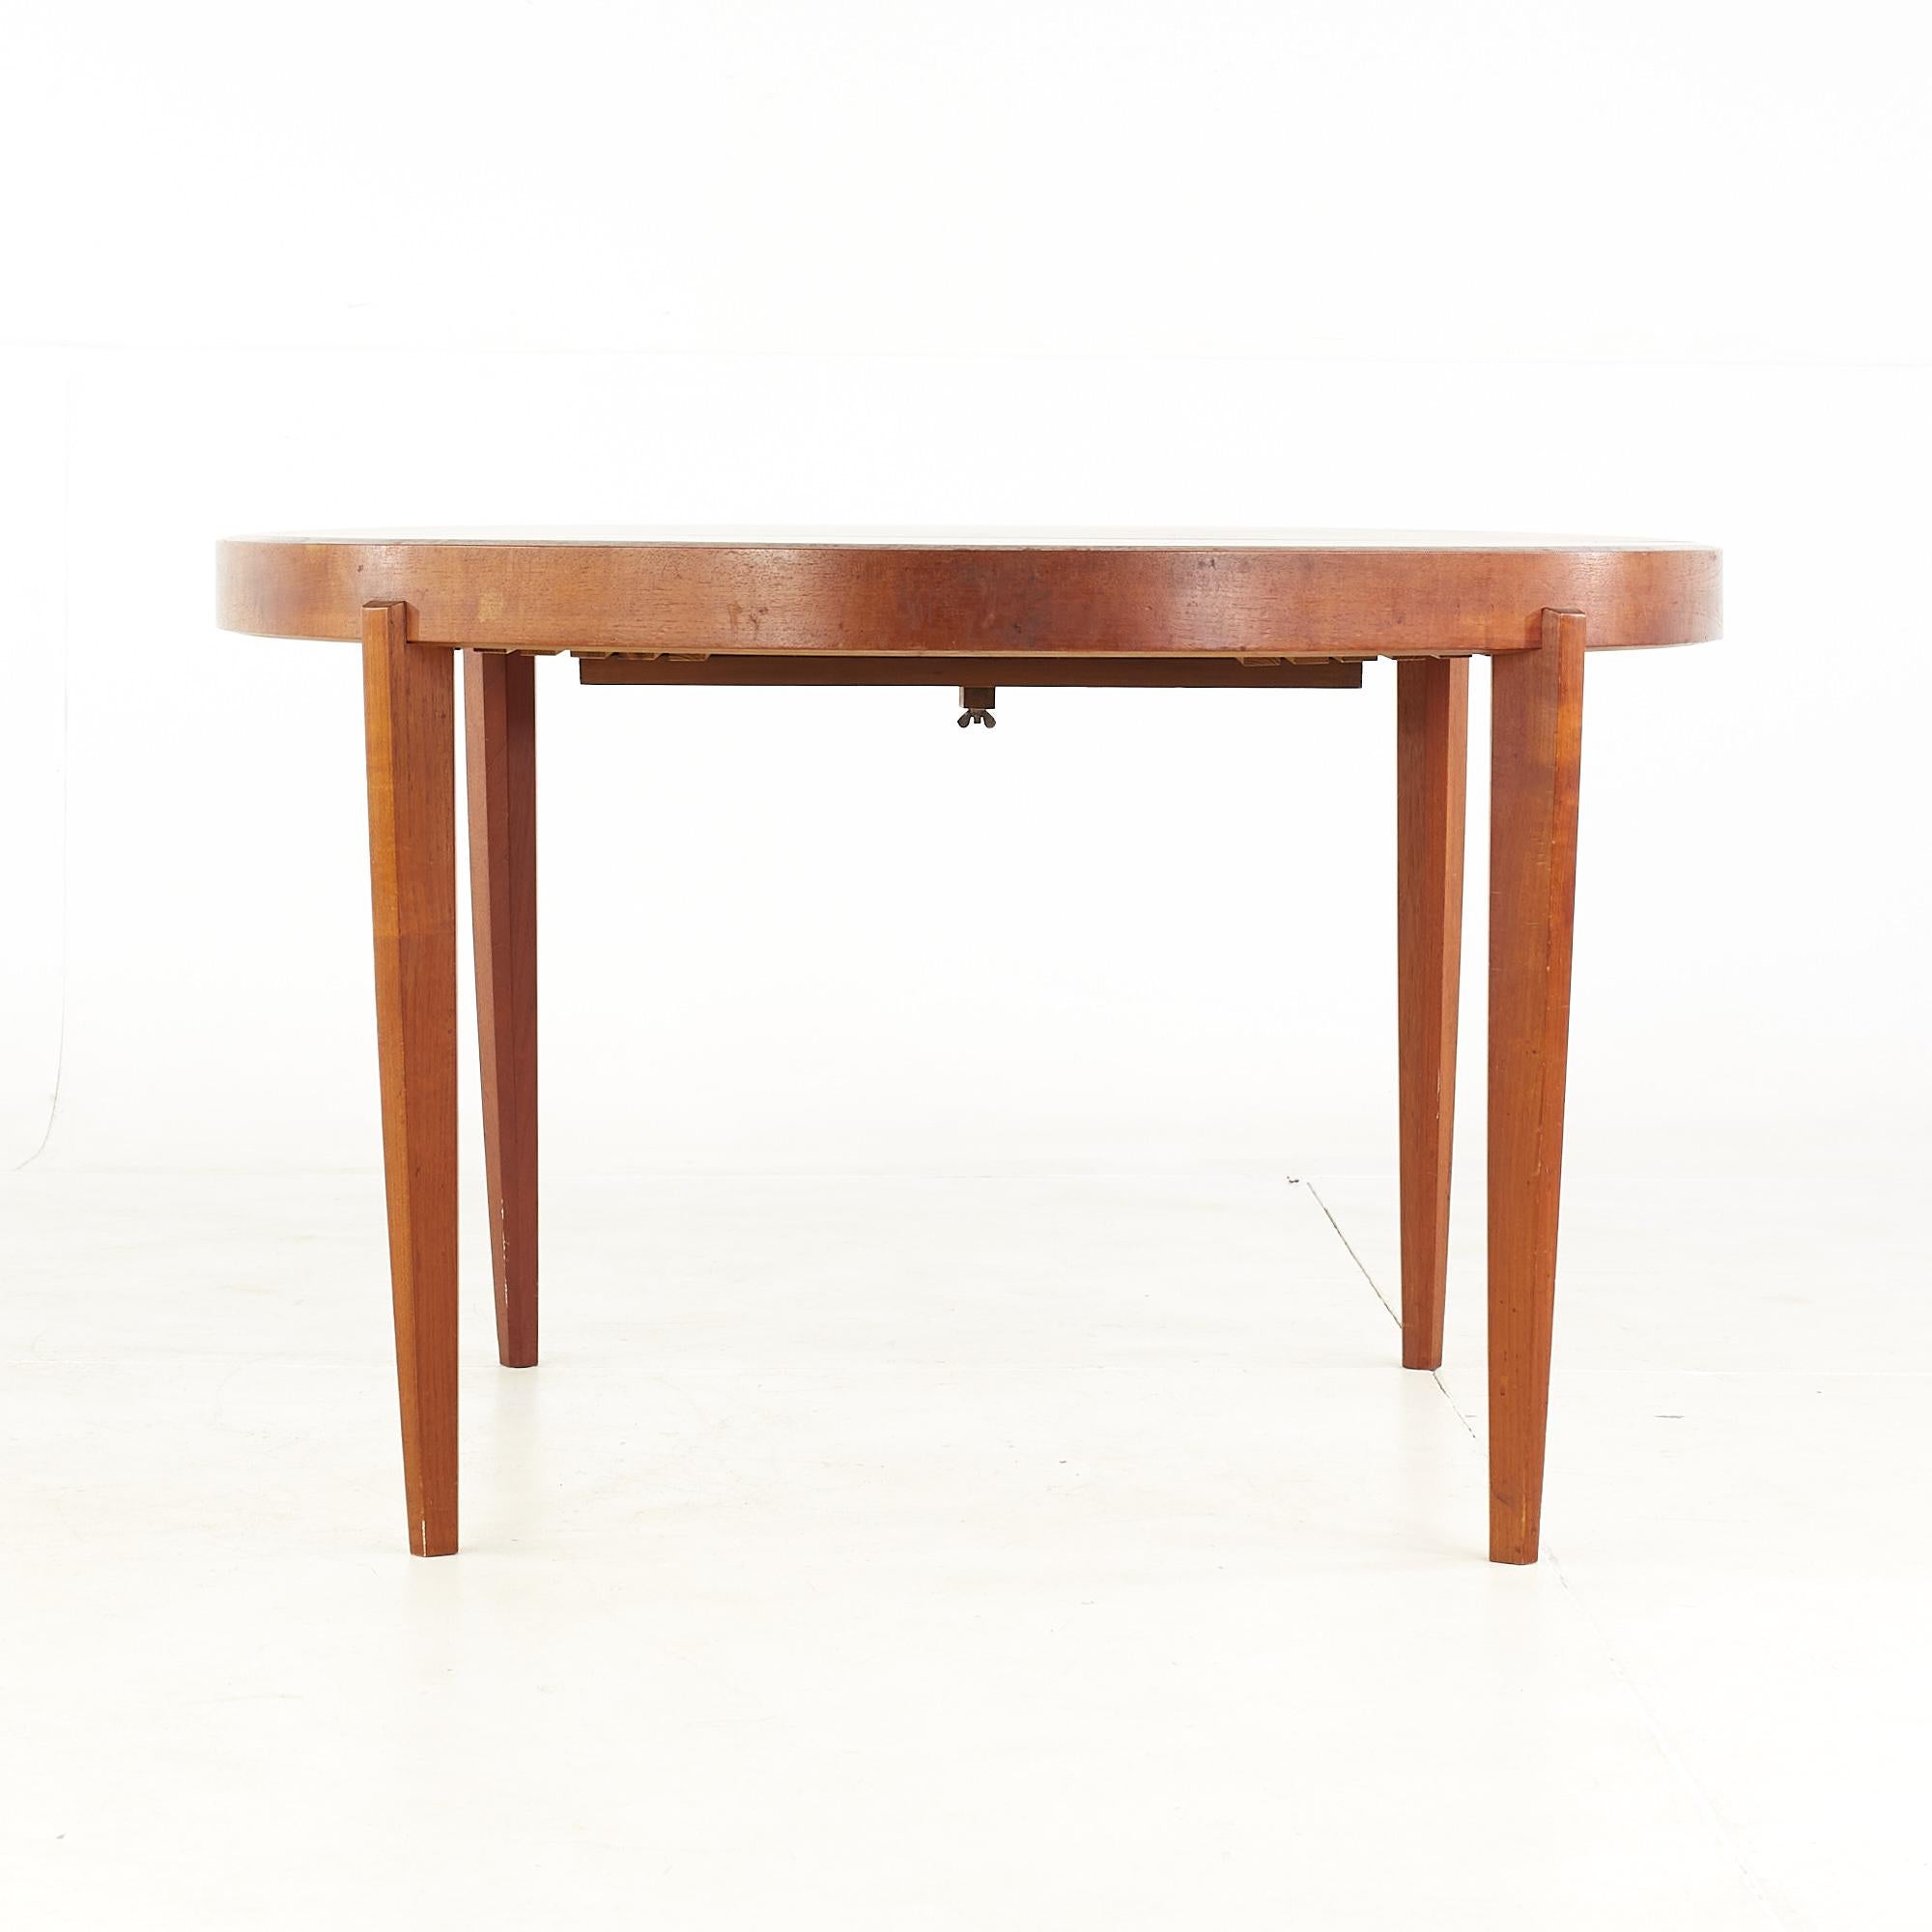 American Johannes Andersen Style Mid-Century Teak Expanding Dining Table with 4 Leaves